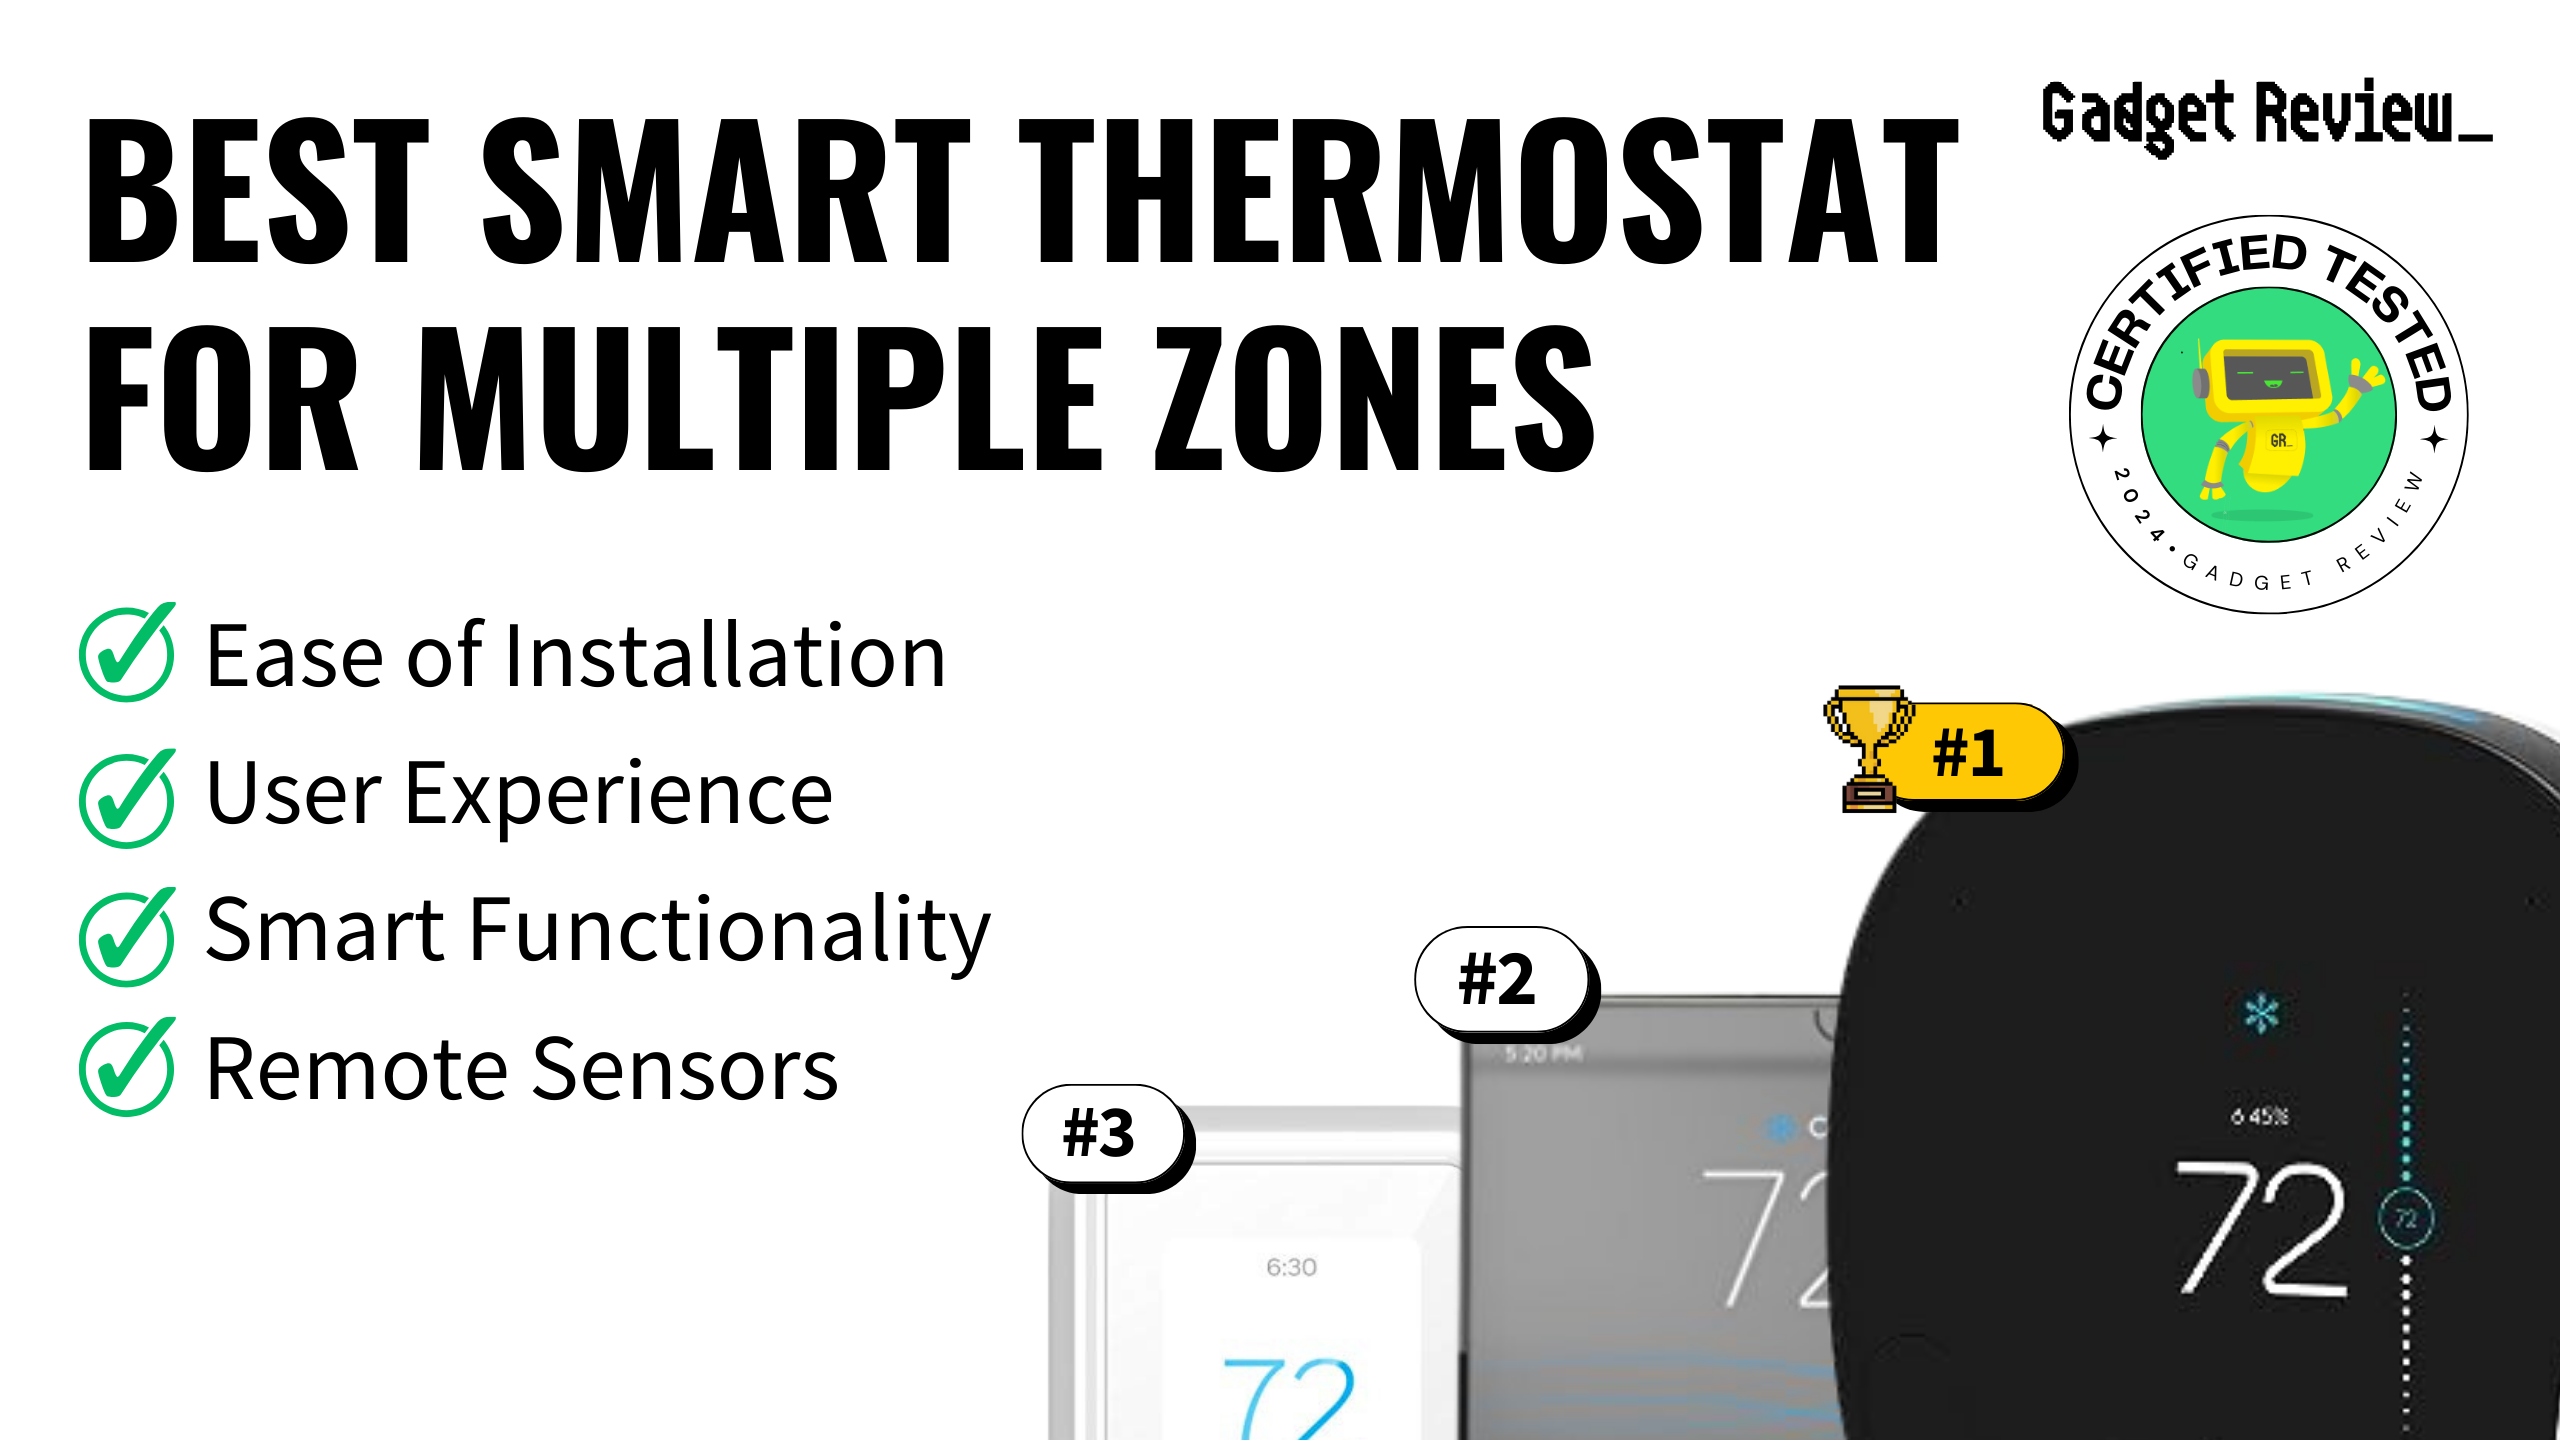 10 Best Smart Thermostats for Multiple Zones